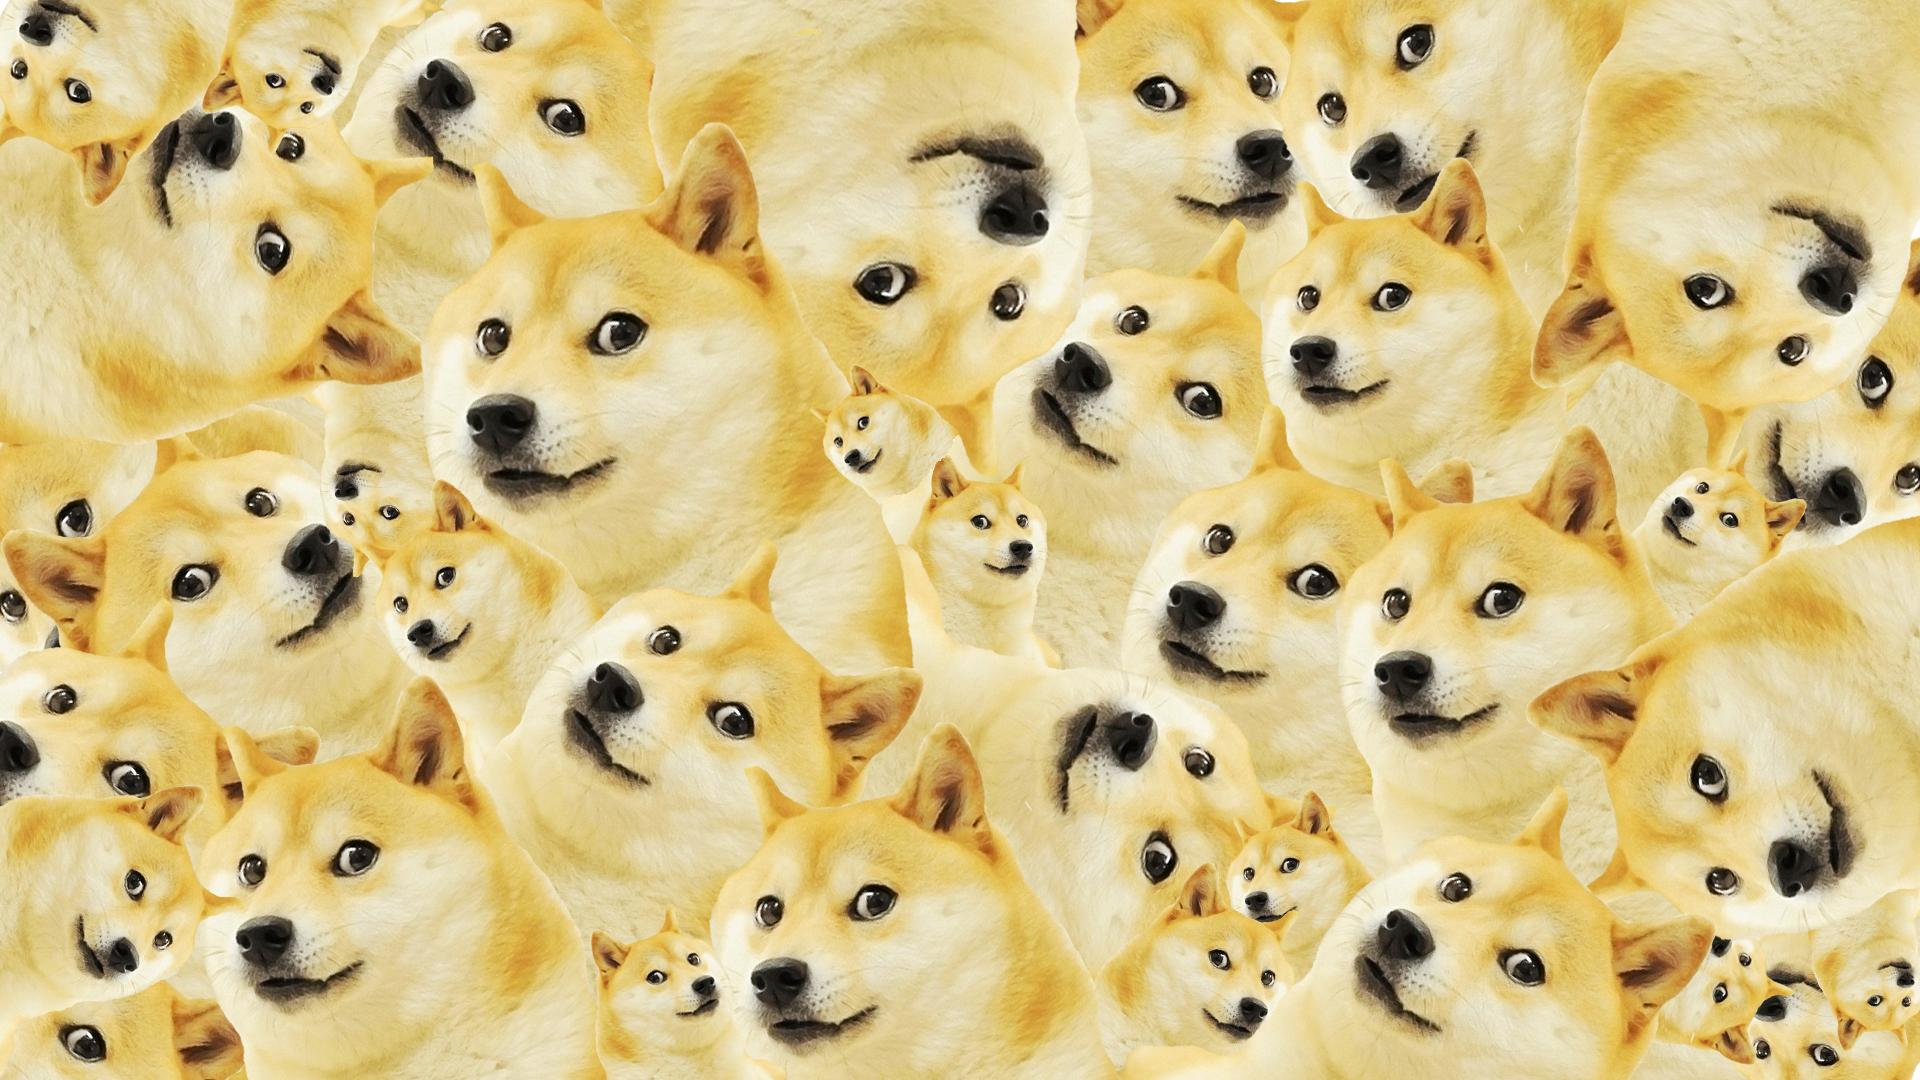 An Image I Made Give As Background To Shibes Dogecoin